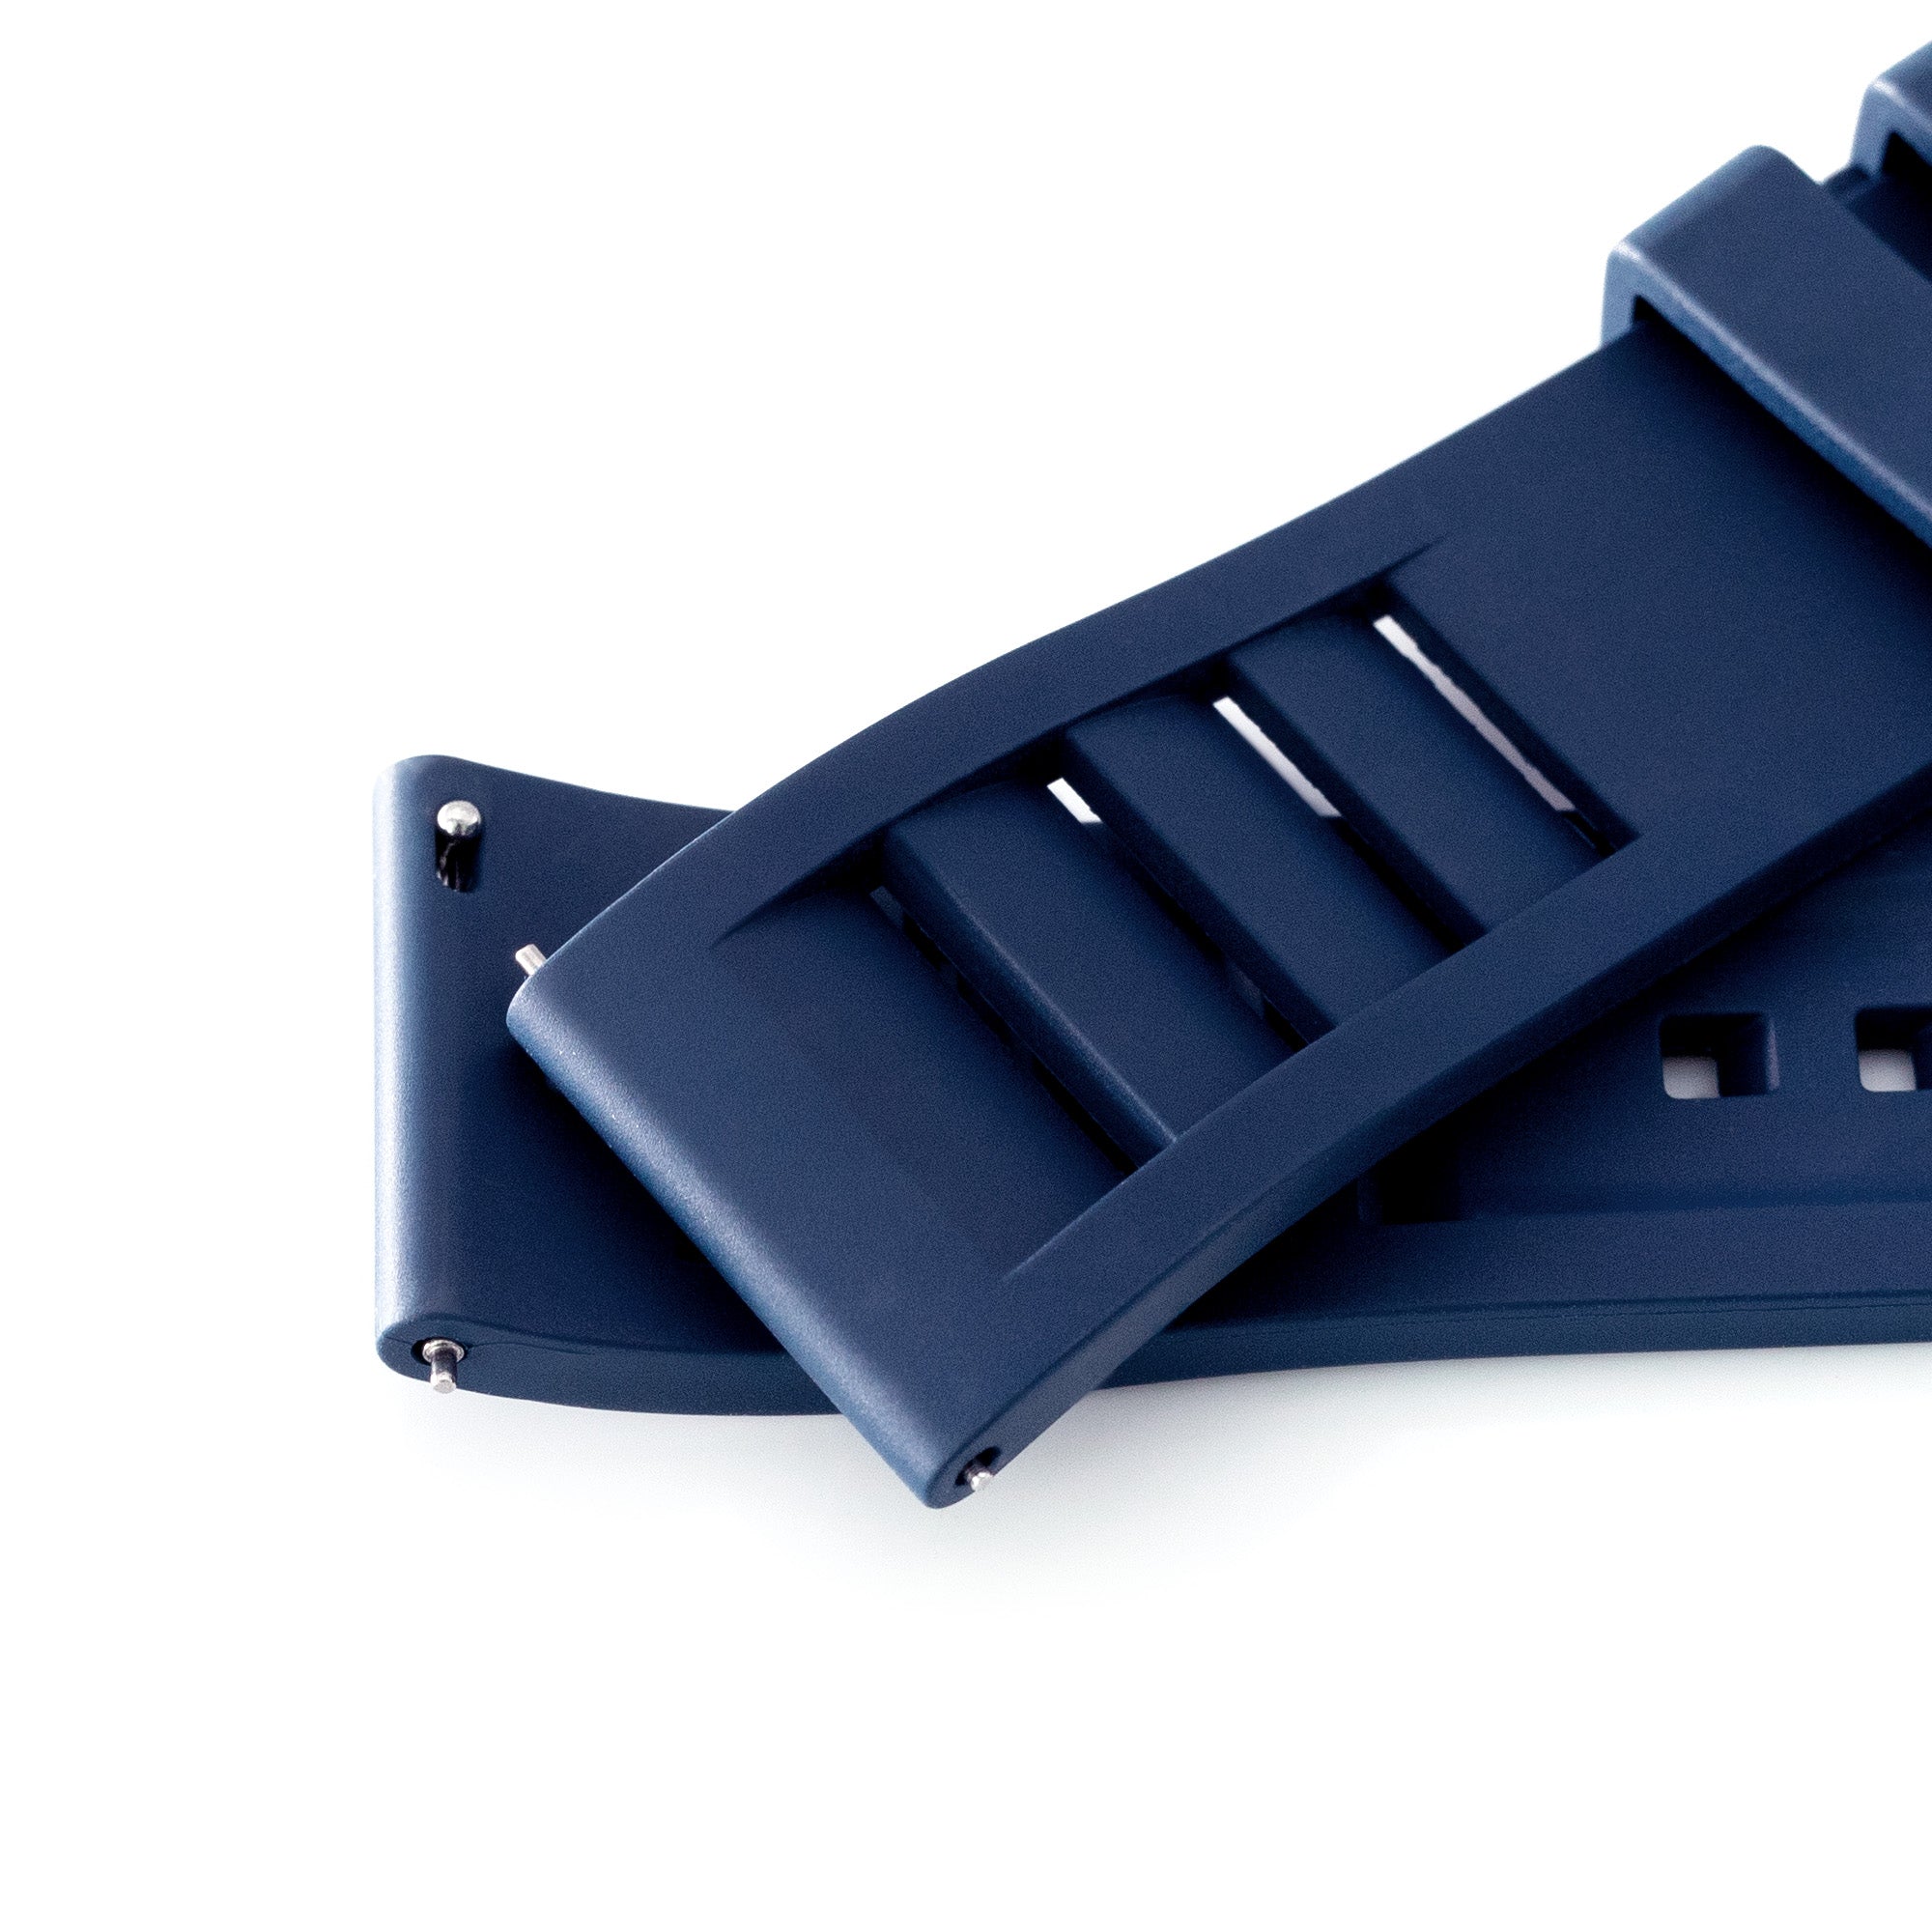 Navy Blue RM Vented FKM Quick Release Rubber Watch Strap, 20mm or 22mm Strapcode Watch Bands